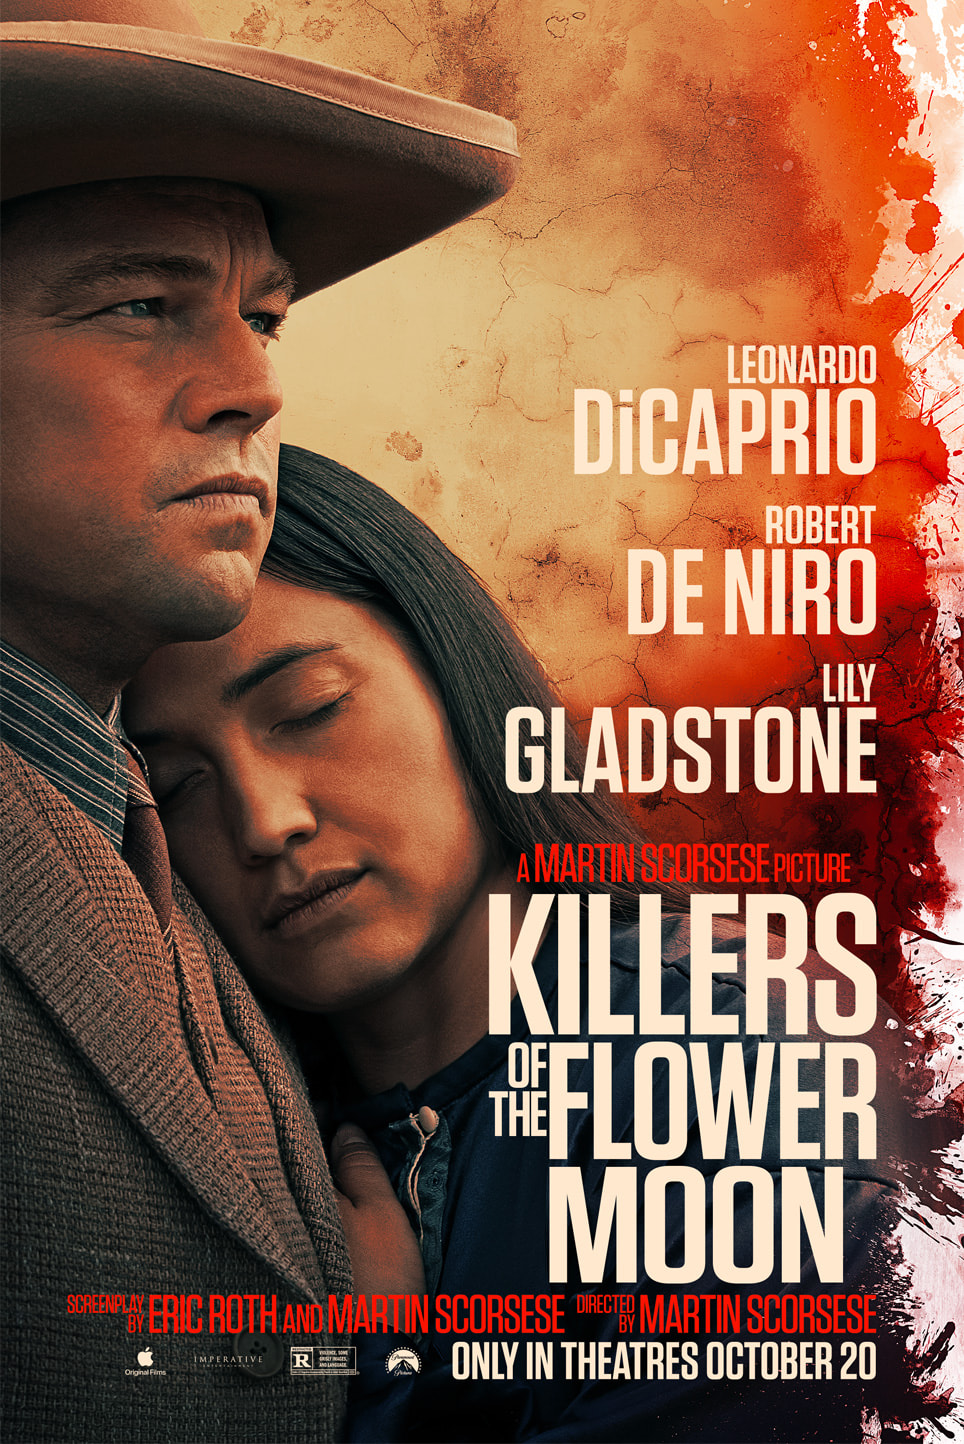 Killers of the Flower Moon Has Scorsese's Best Box Office Opening Since  2010 Leo DiCaprio Movie - IMDb